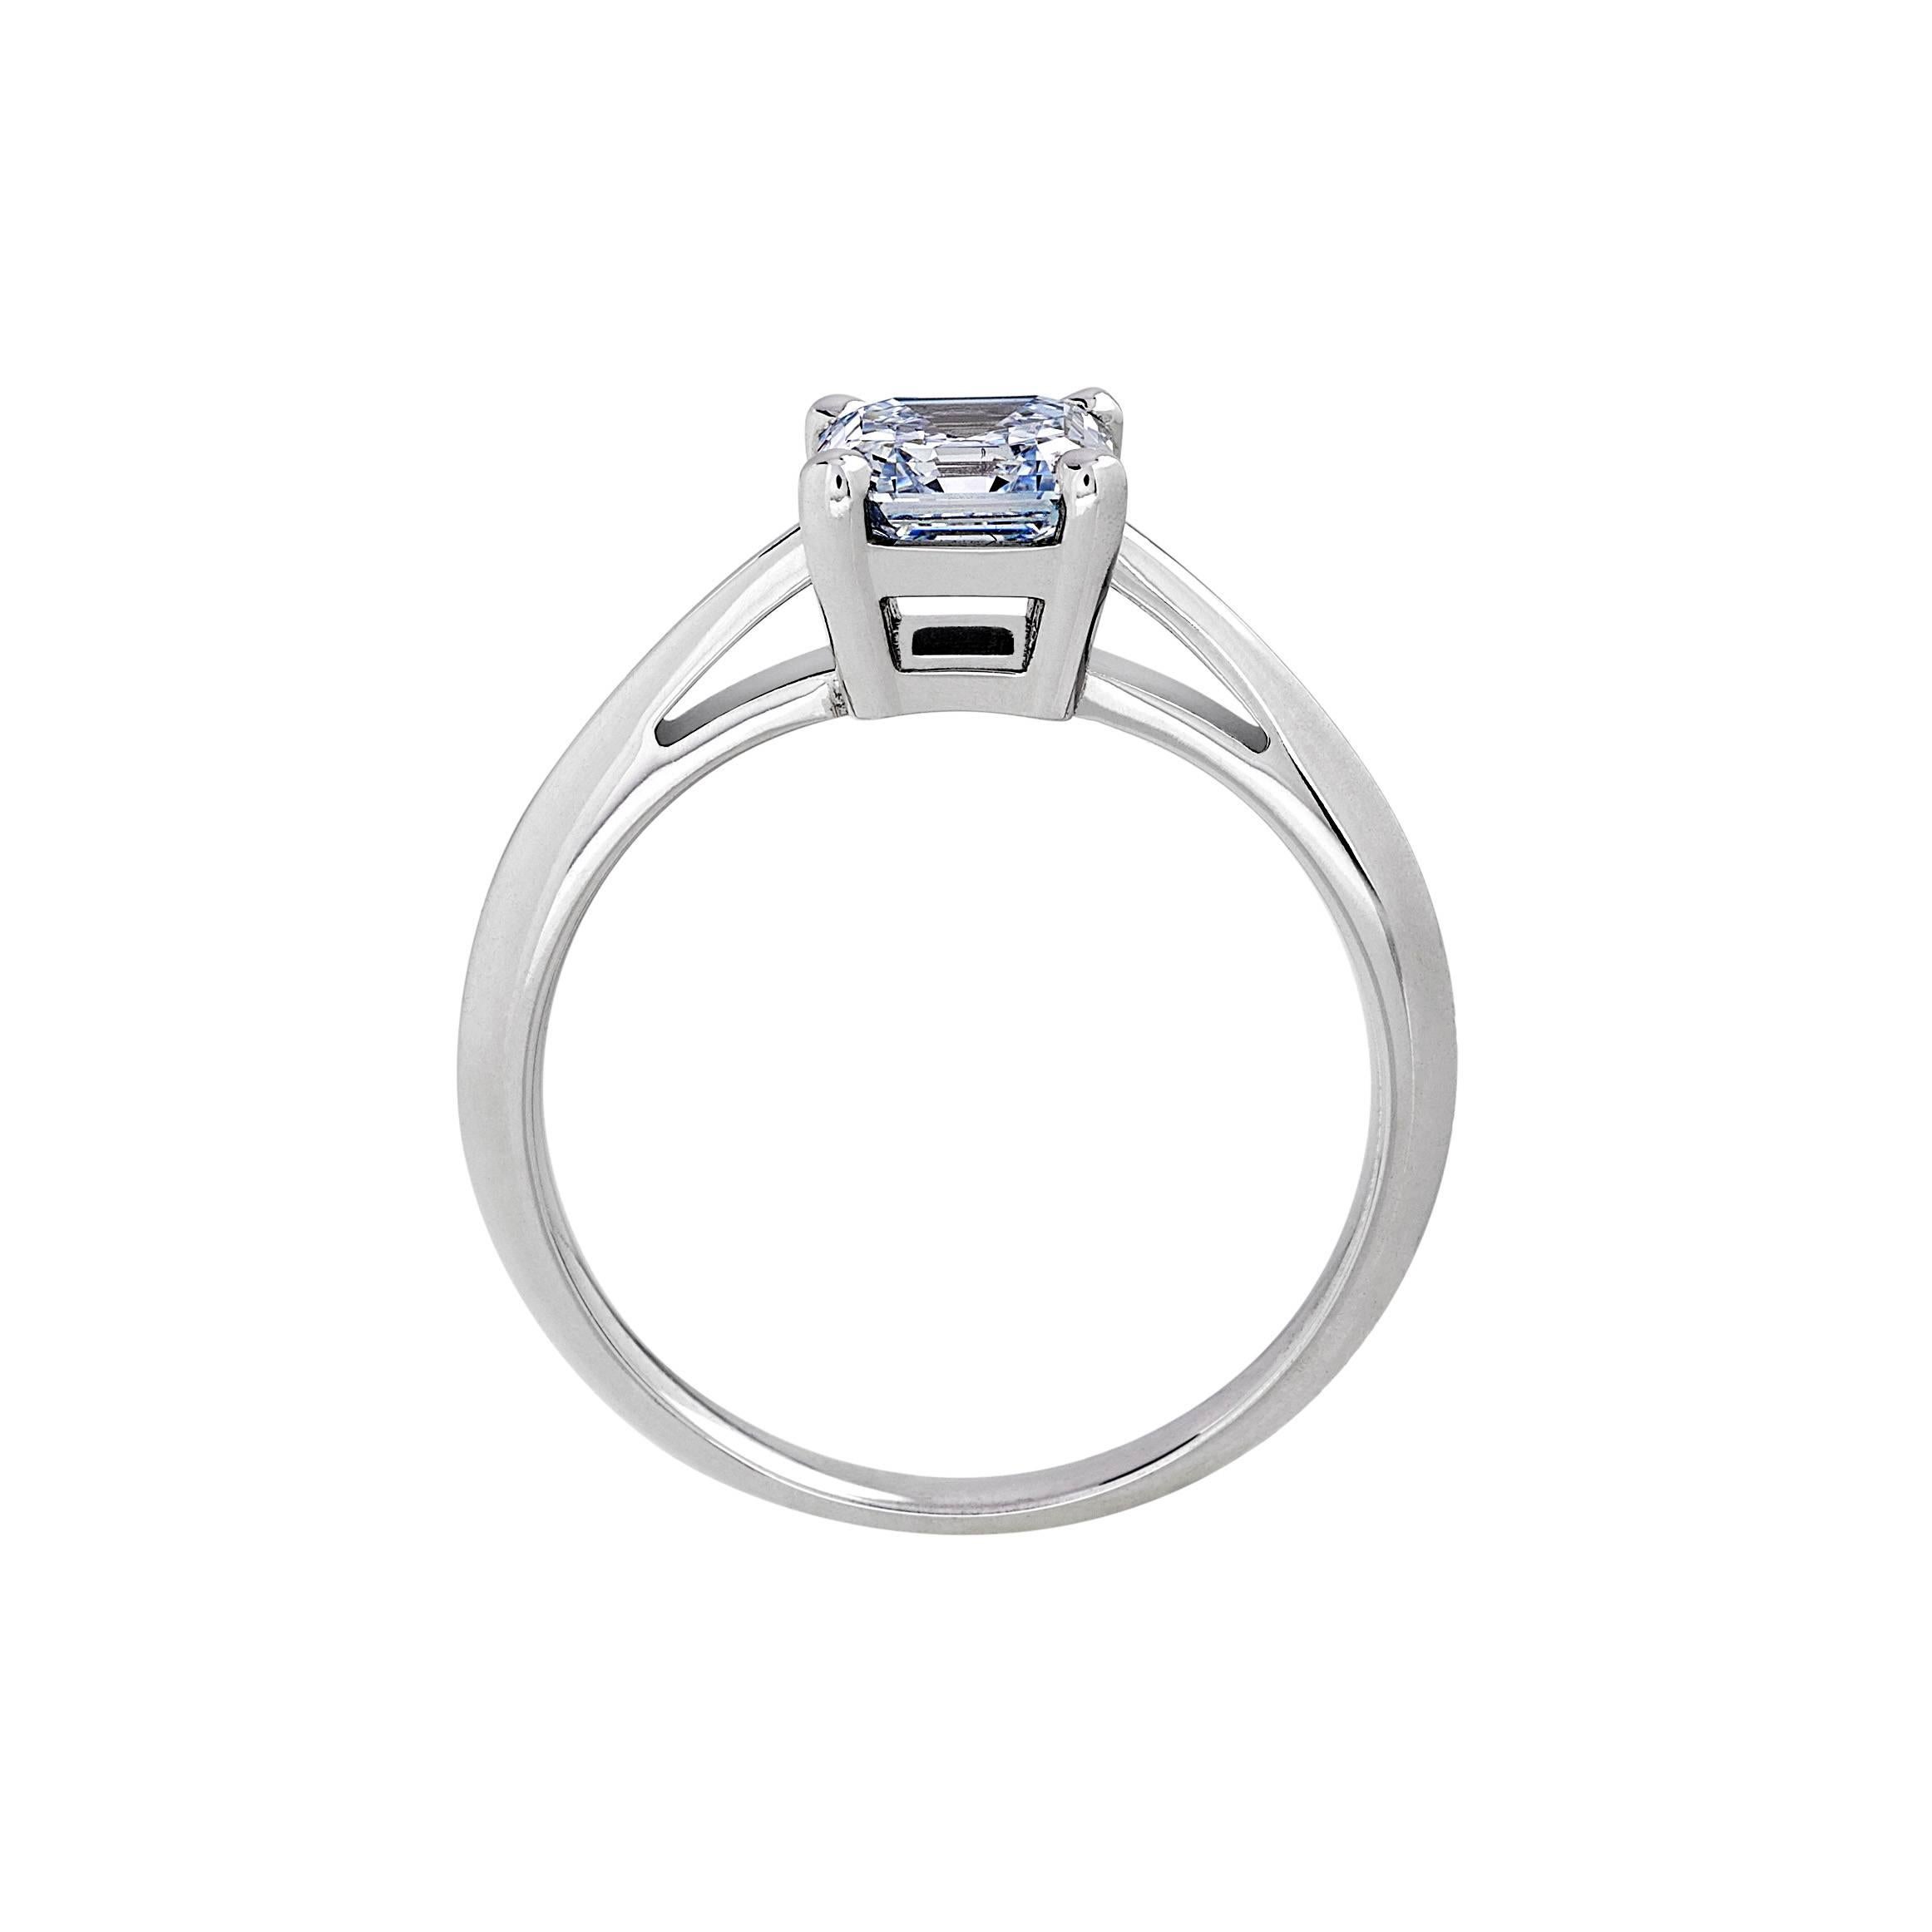 A timeless 1 carat Asscher cut diamond set amongst a brilliant backdrop of polished 18k Fairtrade white gold. This ensures this precious diamond takes centre stage.